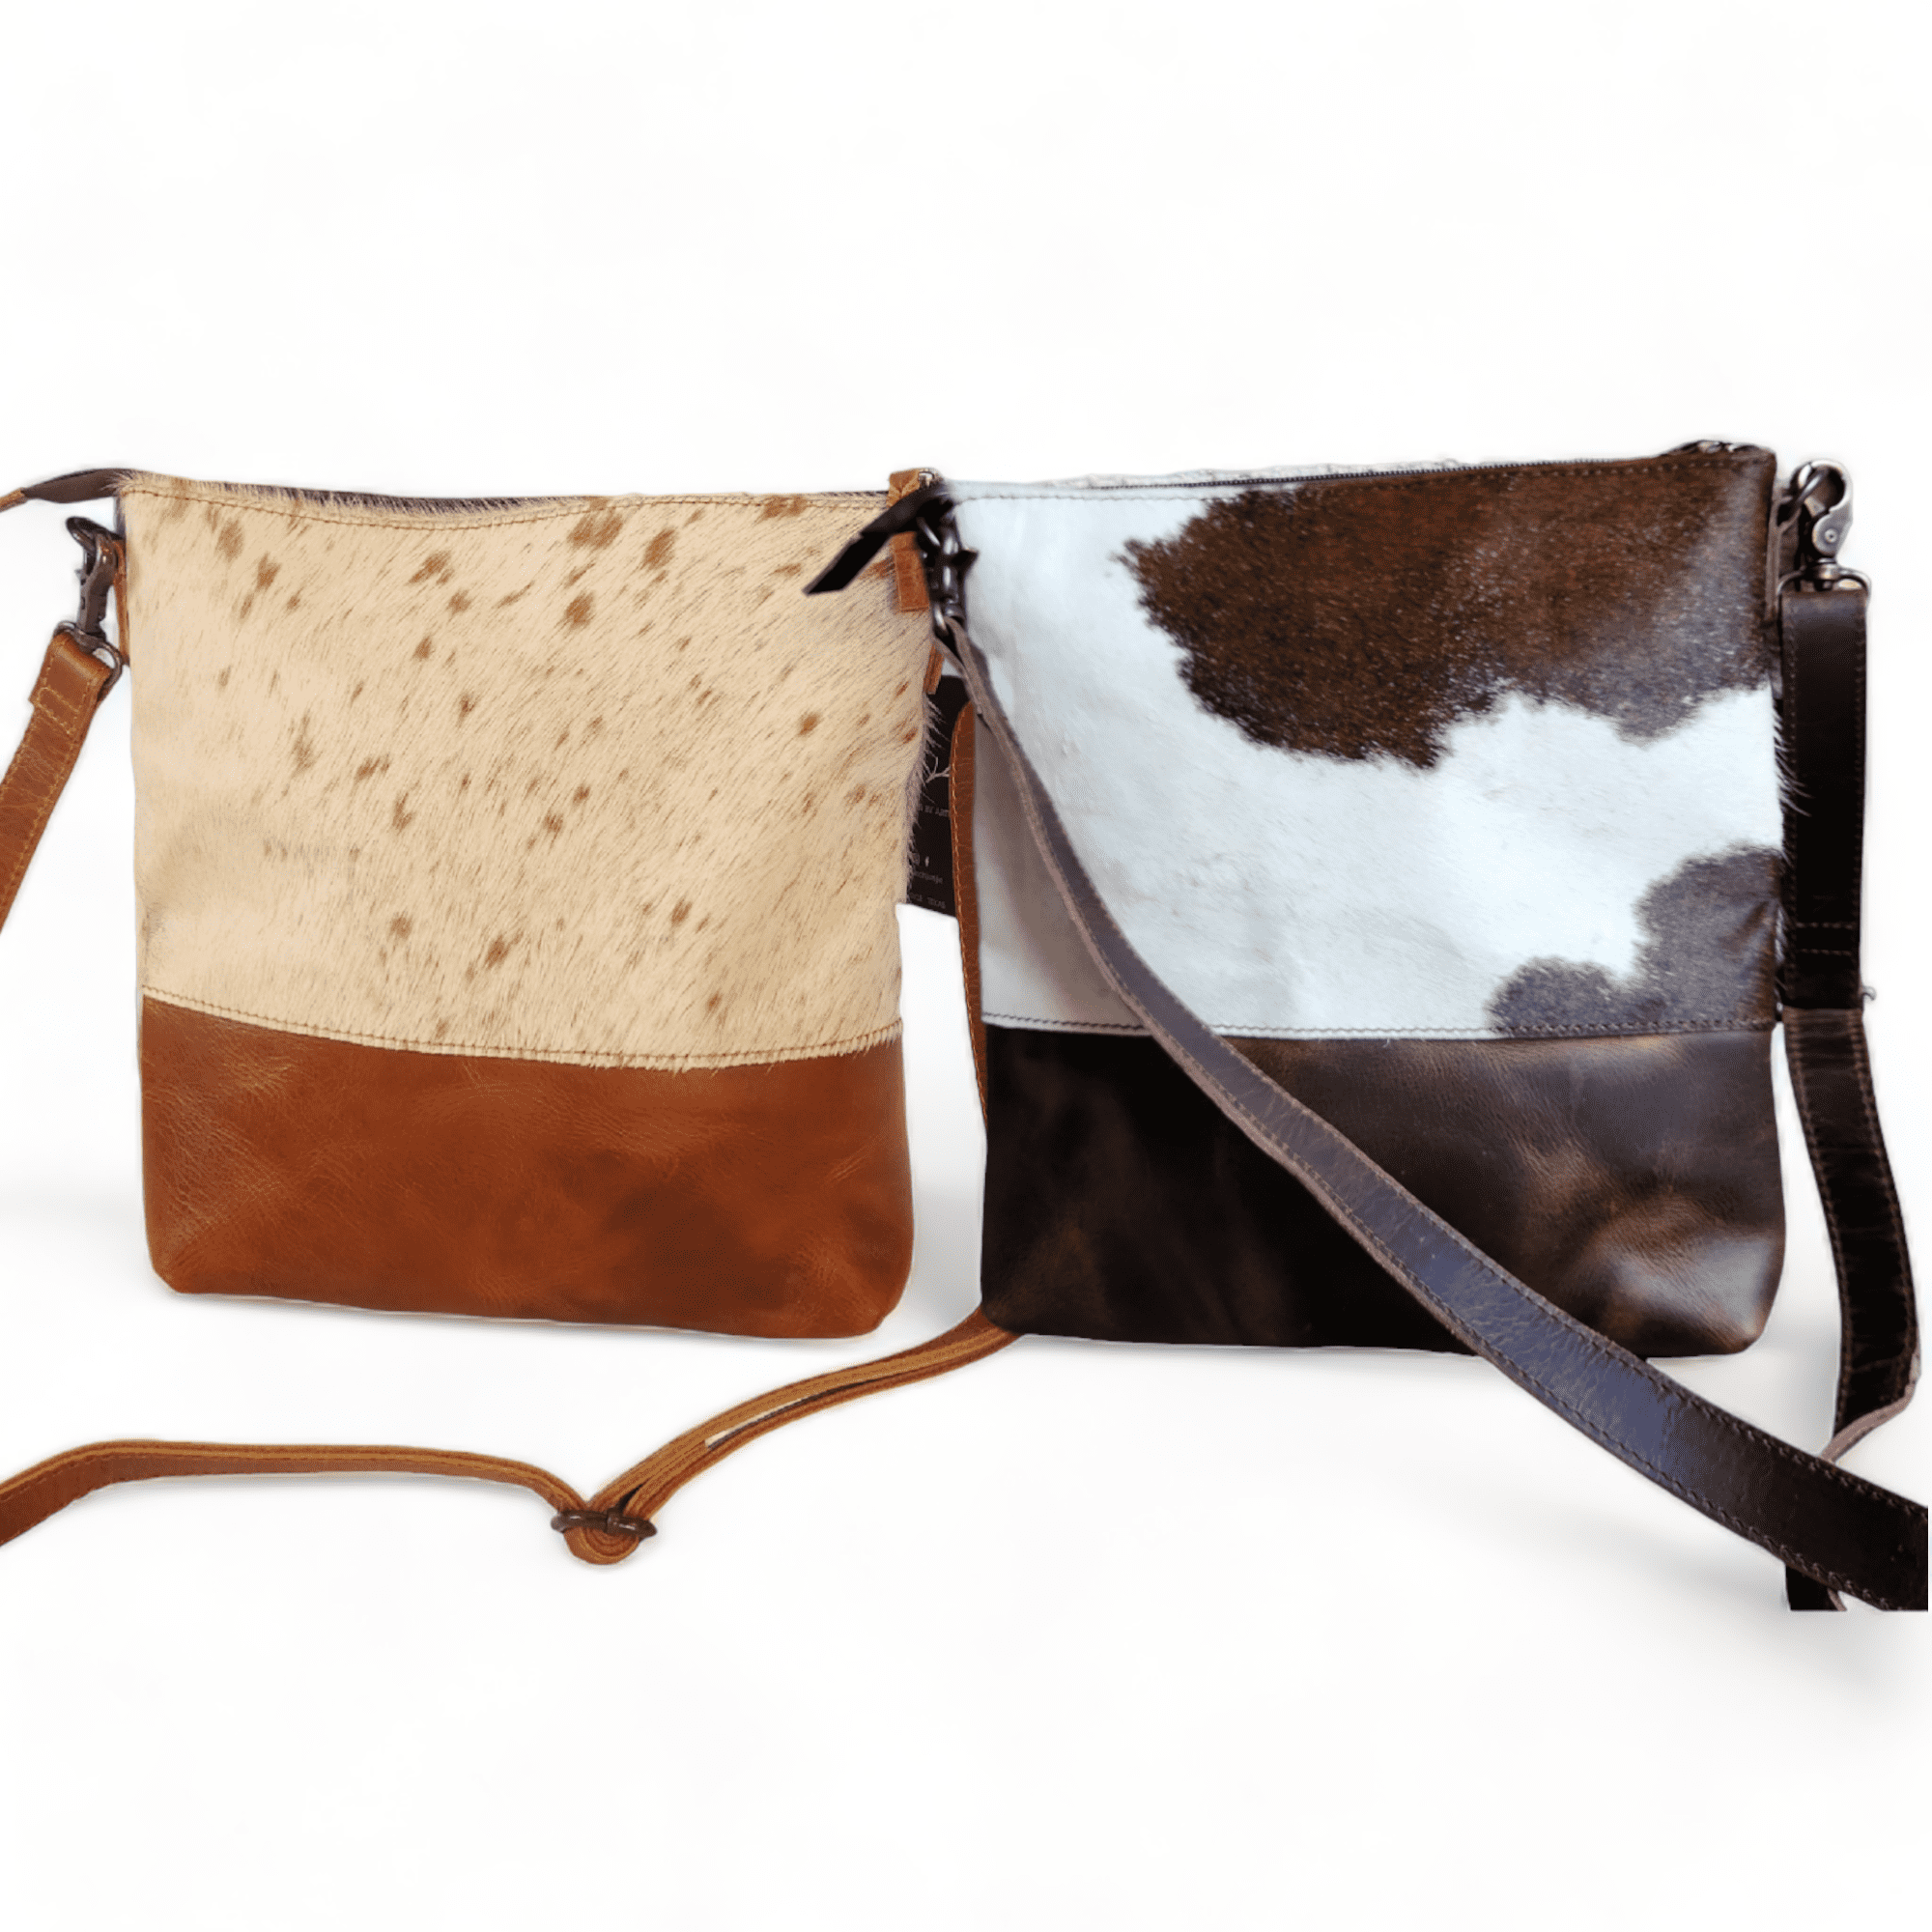 The Highlands Genuine Cowhide Large Crossbody Bag Saddle And Dark Brown Leather Crossbody Purse Luggage & BagsRanch Junkie